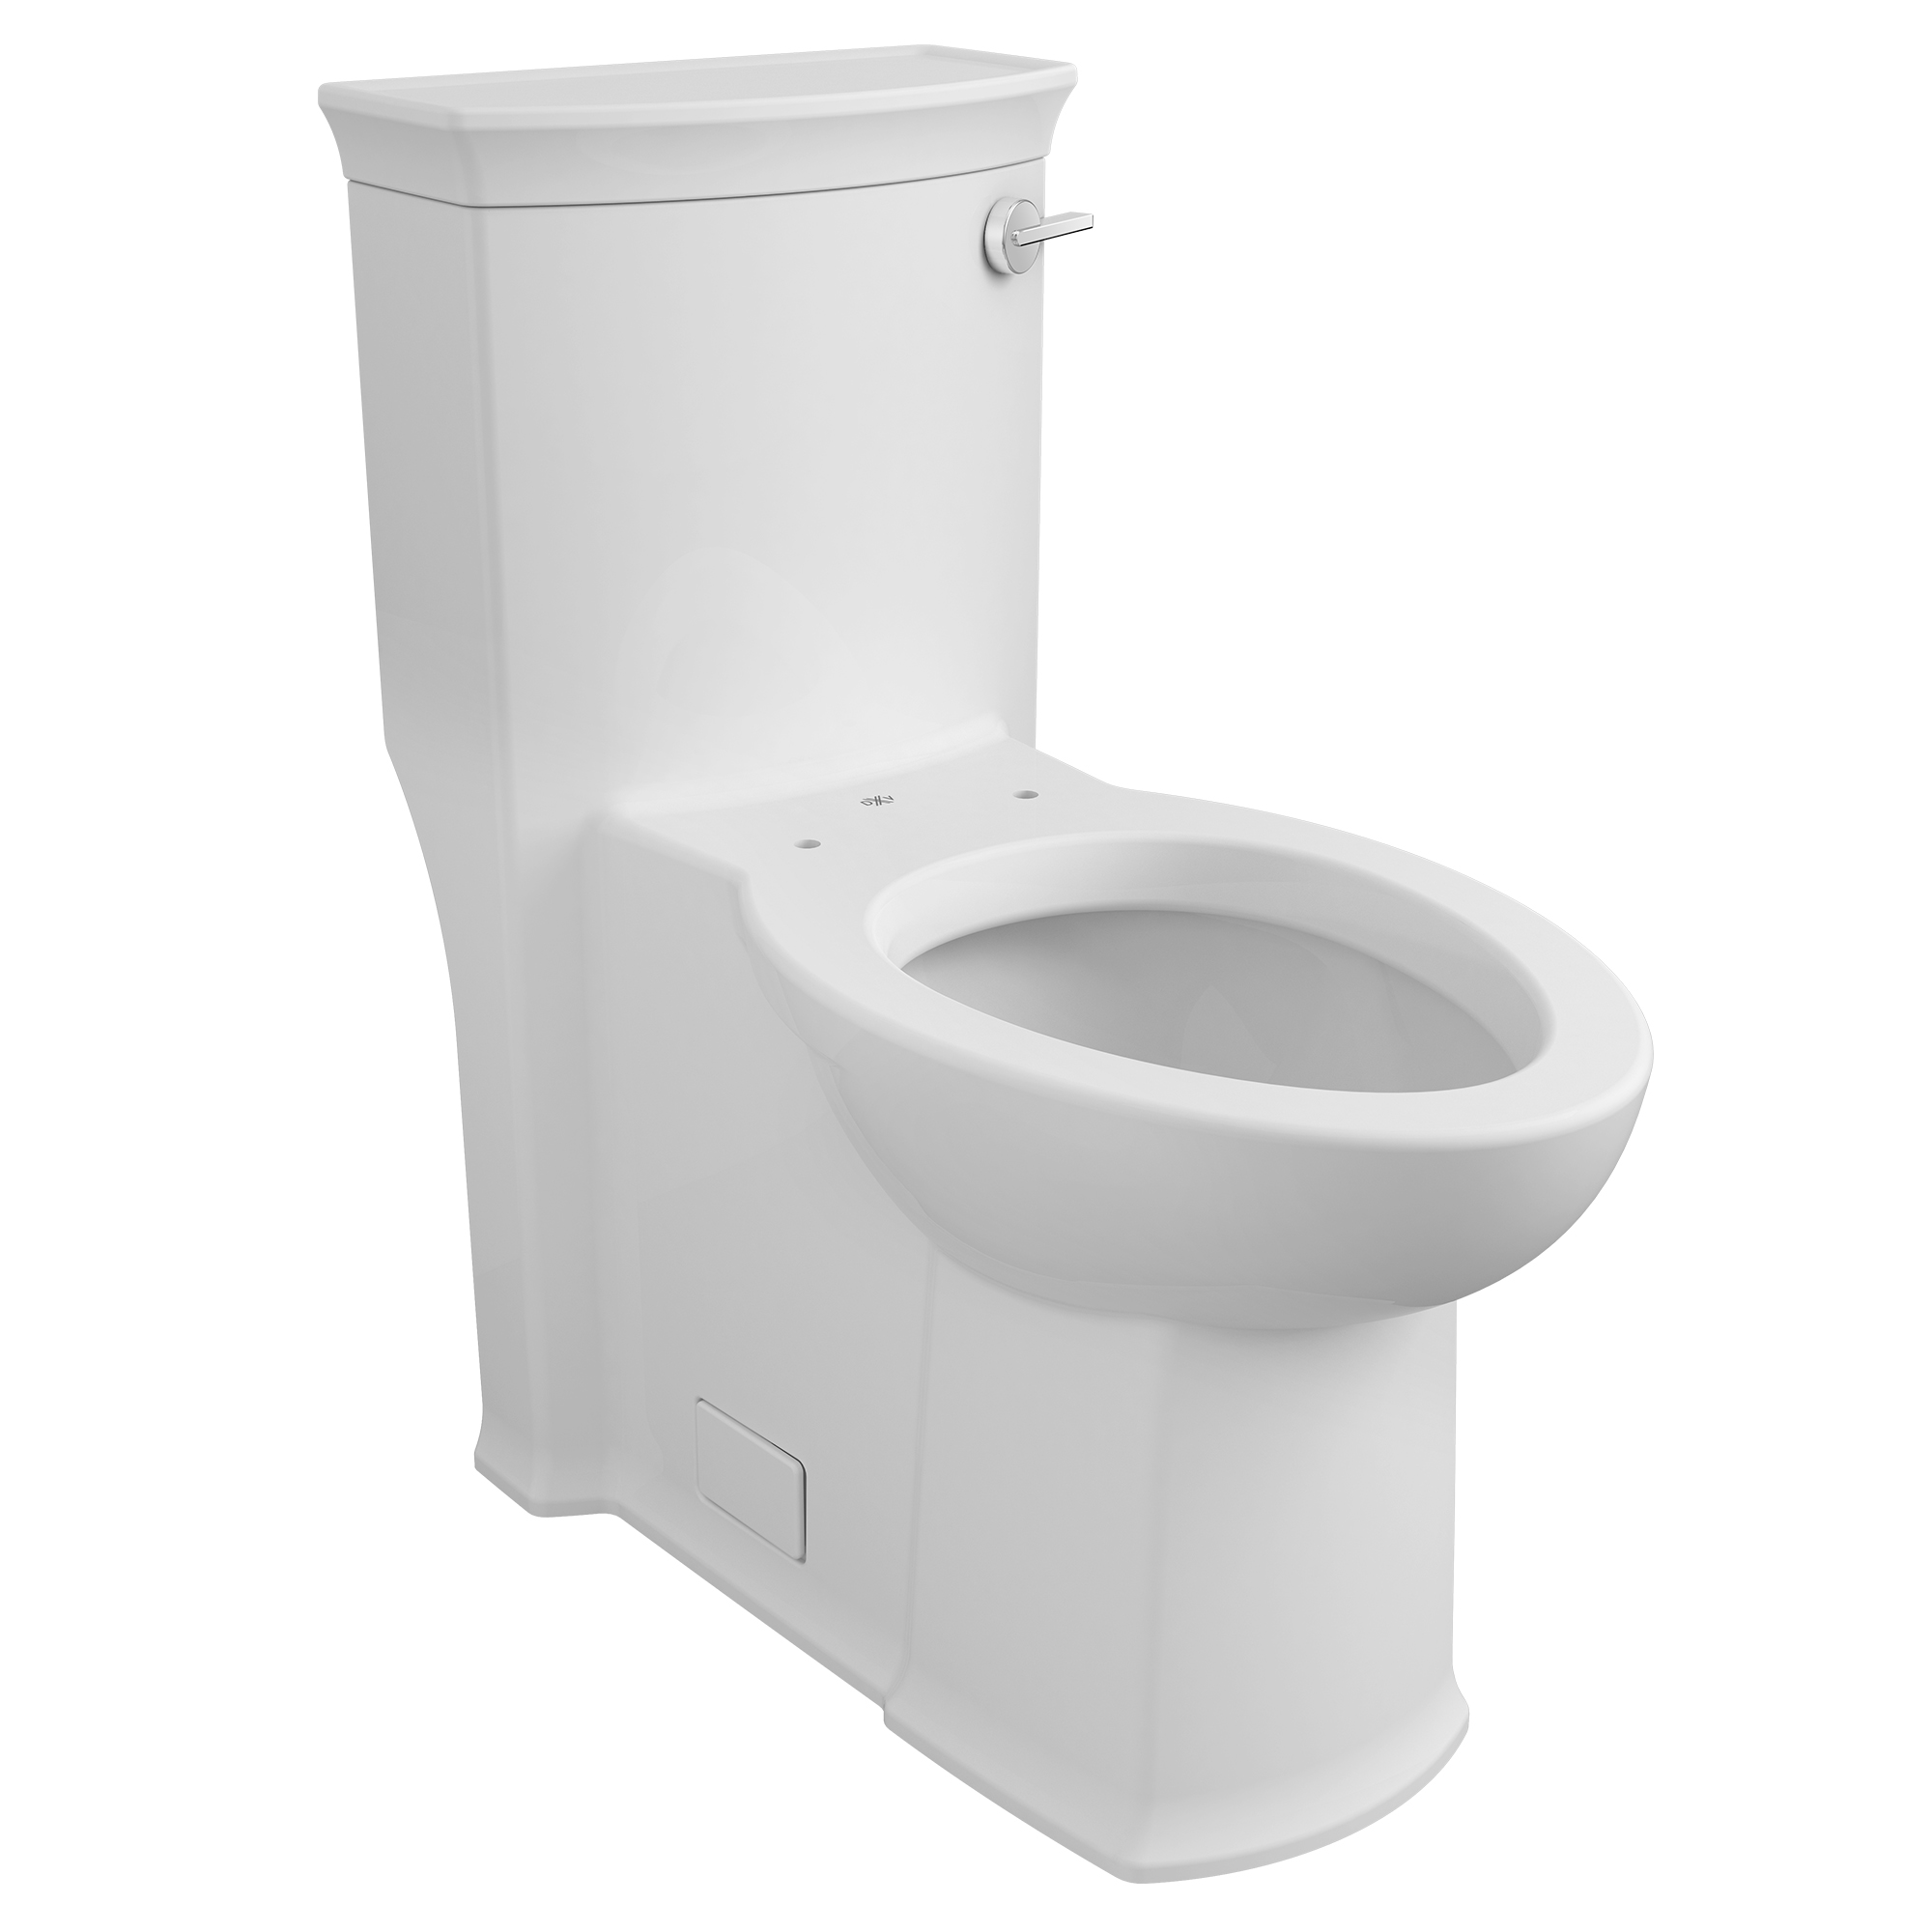 Wyatt Chair Height Elongated Toilet Bowl with Seat